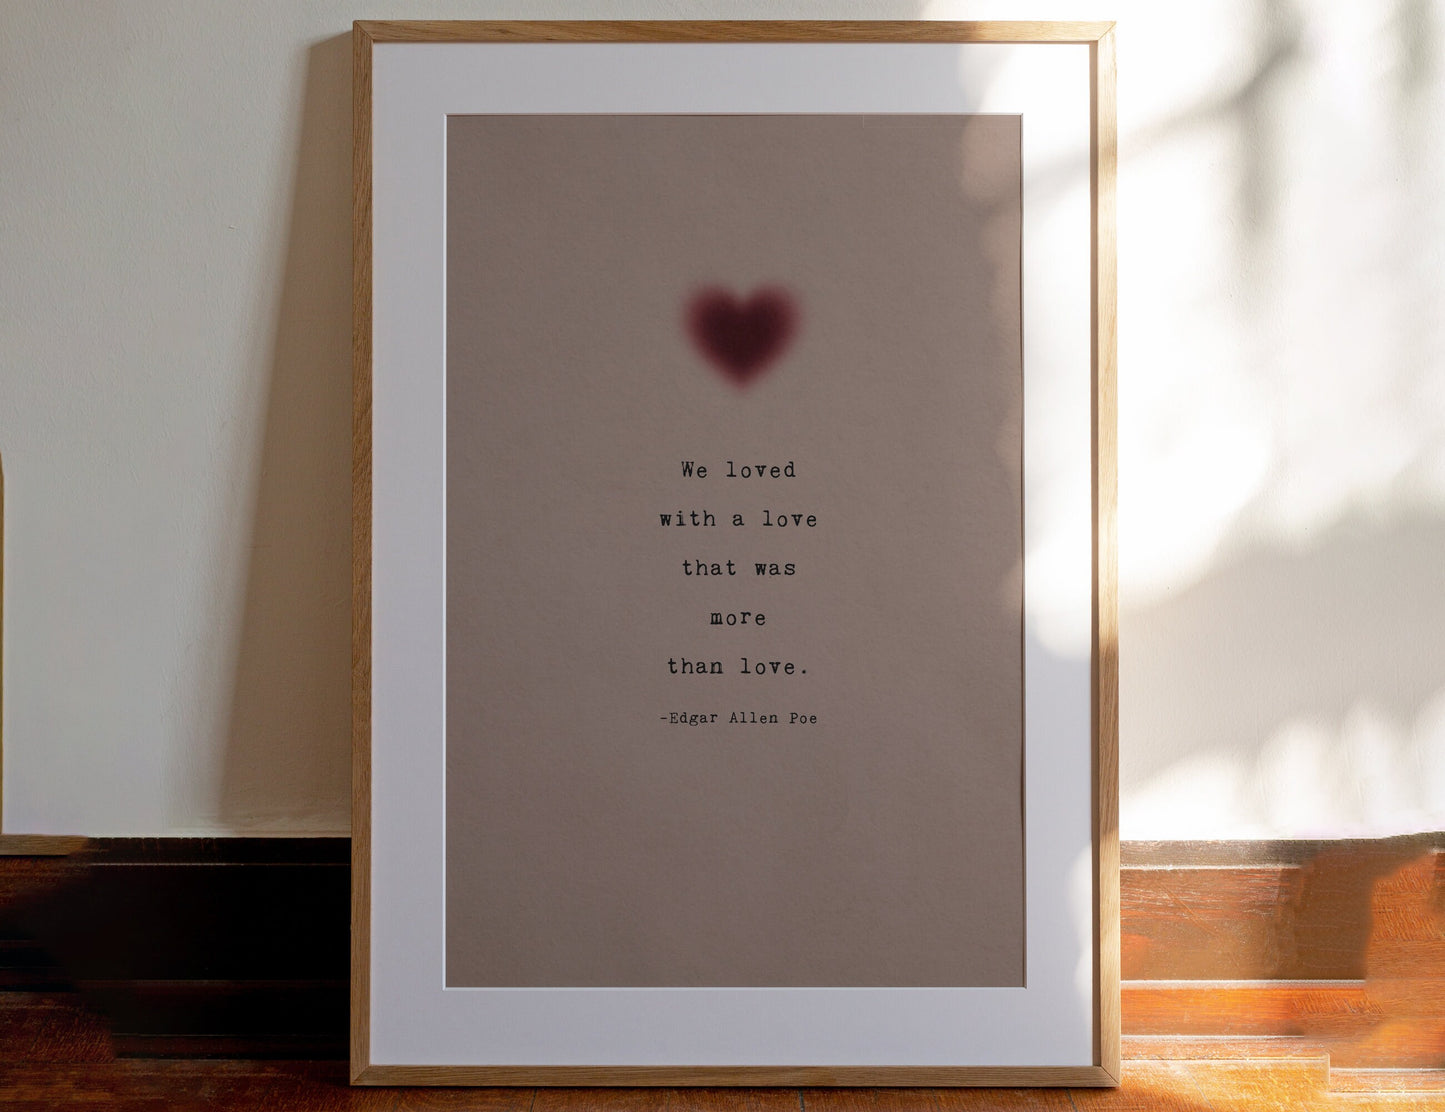 Edgar Allen Poe quote art "We loved with a love that was more than love" wall art